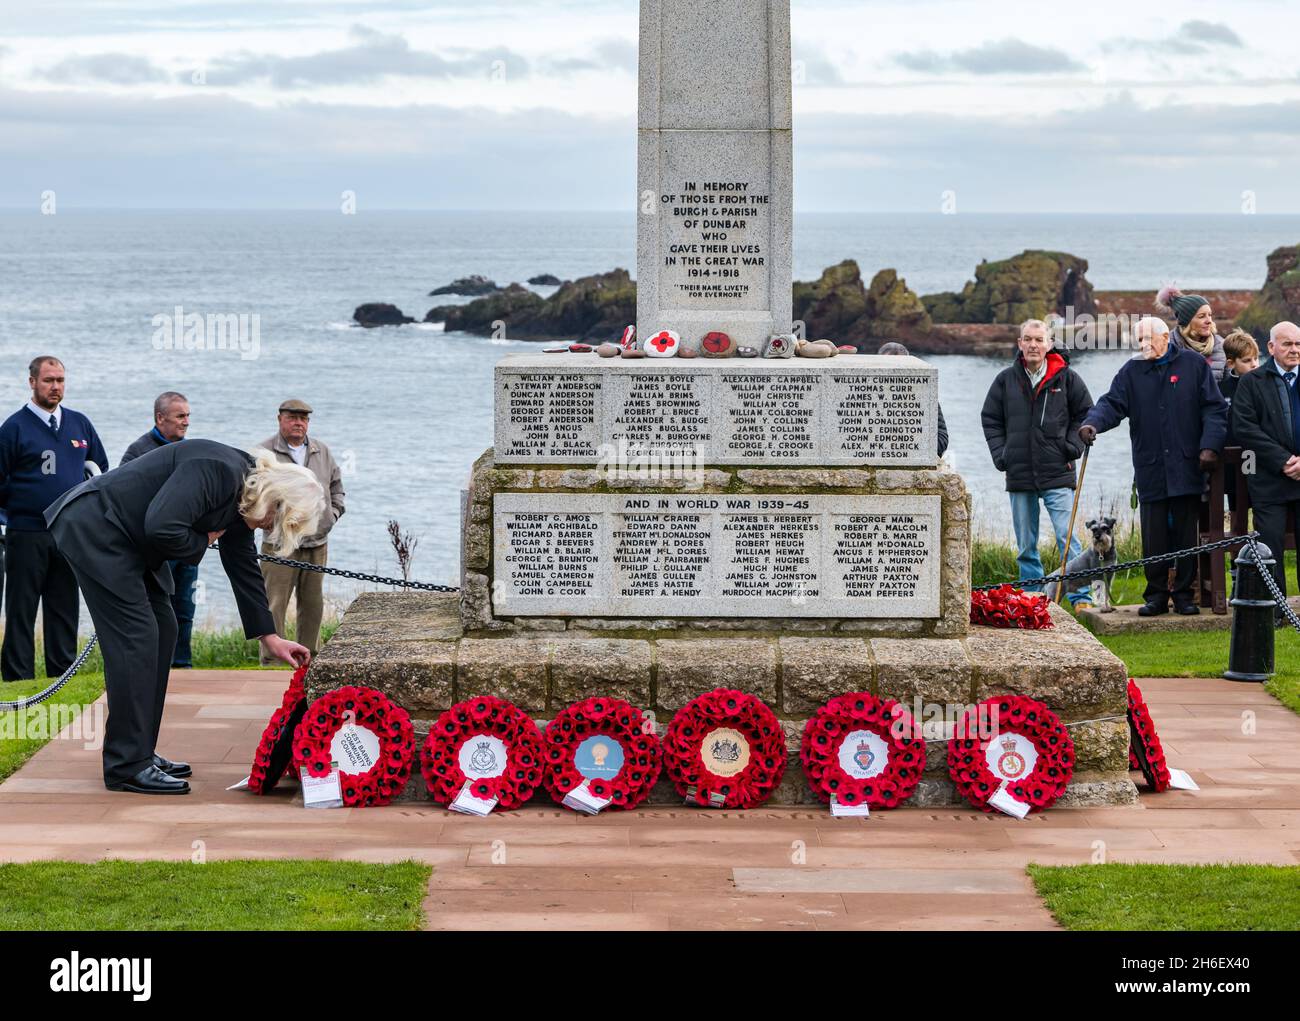 Man laying poppy wreath at war memorial in Remembrance Day ceremony, Dunbar, East Lothian, Scotland, UK Stock Photo